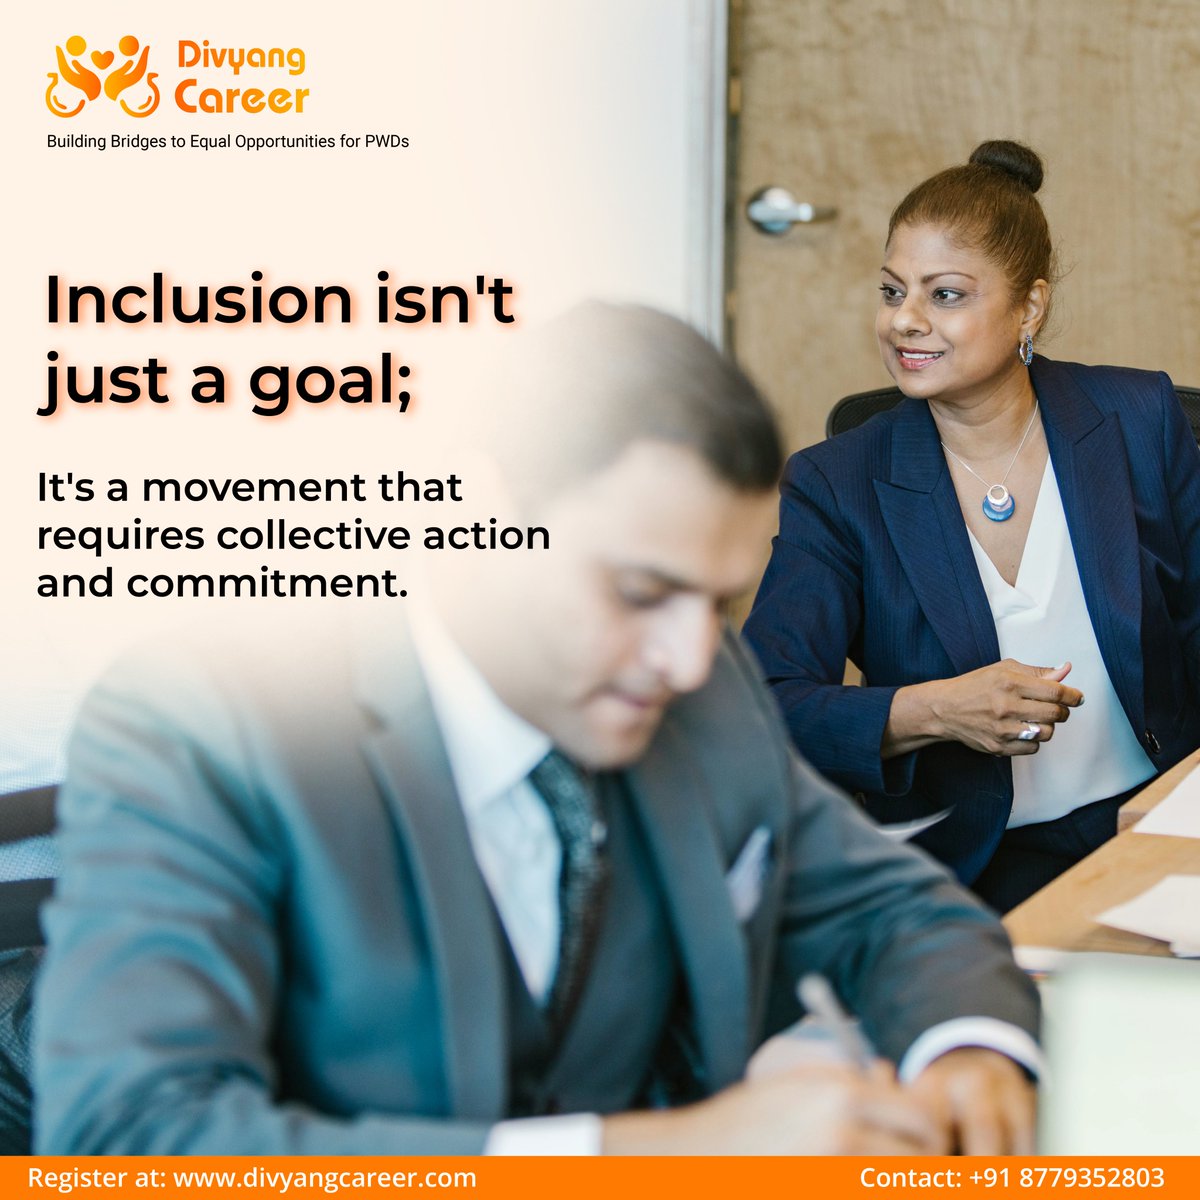 Let's amplify voices, challenge norms, and pave the way for a future where everyone's talents are celebrated and opportunities abound.
#PwDJobs #empowercarrerr #CareerJobs #jobseekers #CareerGoals #CareerOpportunities #goal #ConnectWithUs #careergrowth #talent #PWD #divyangcareer